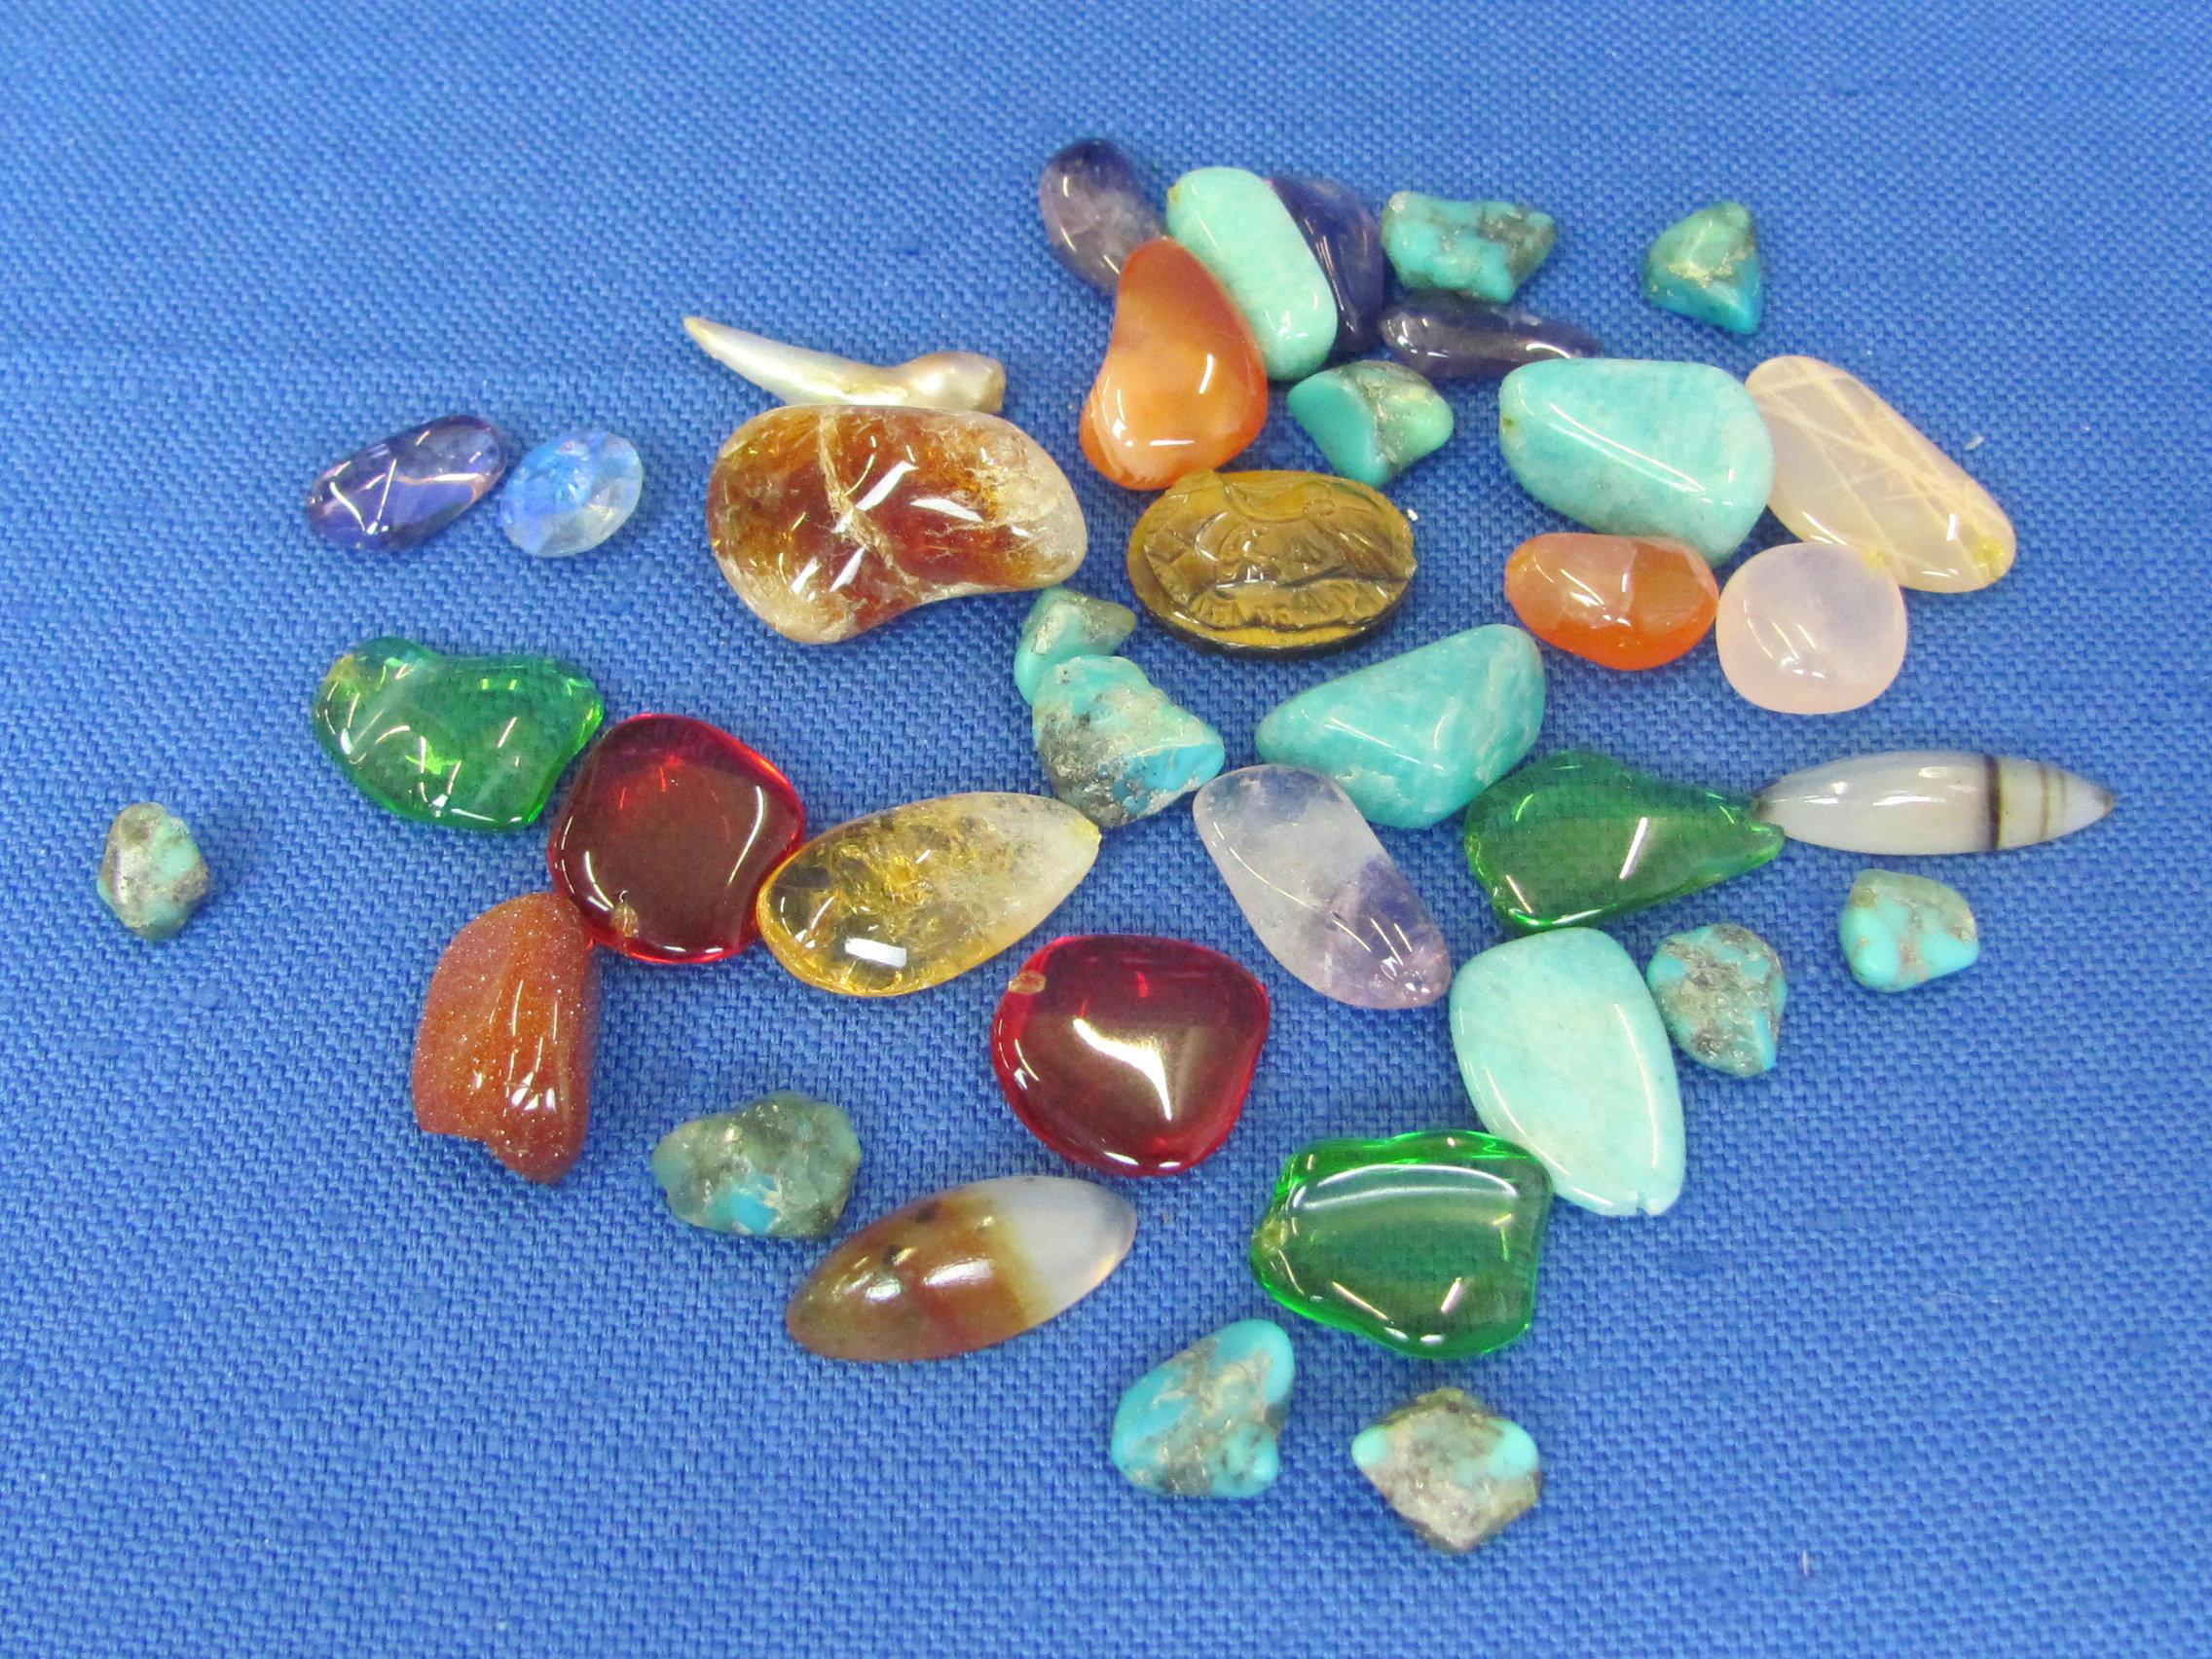 Make your own Jewelry, Lot of Rocks, Stones, Jewels, Elk's Tooth & more.. Longest is 1 3/4”